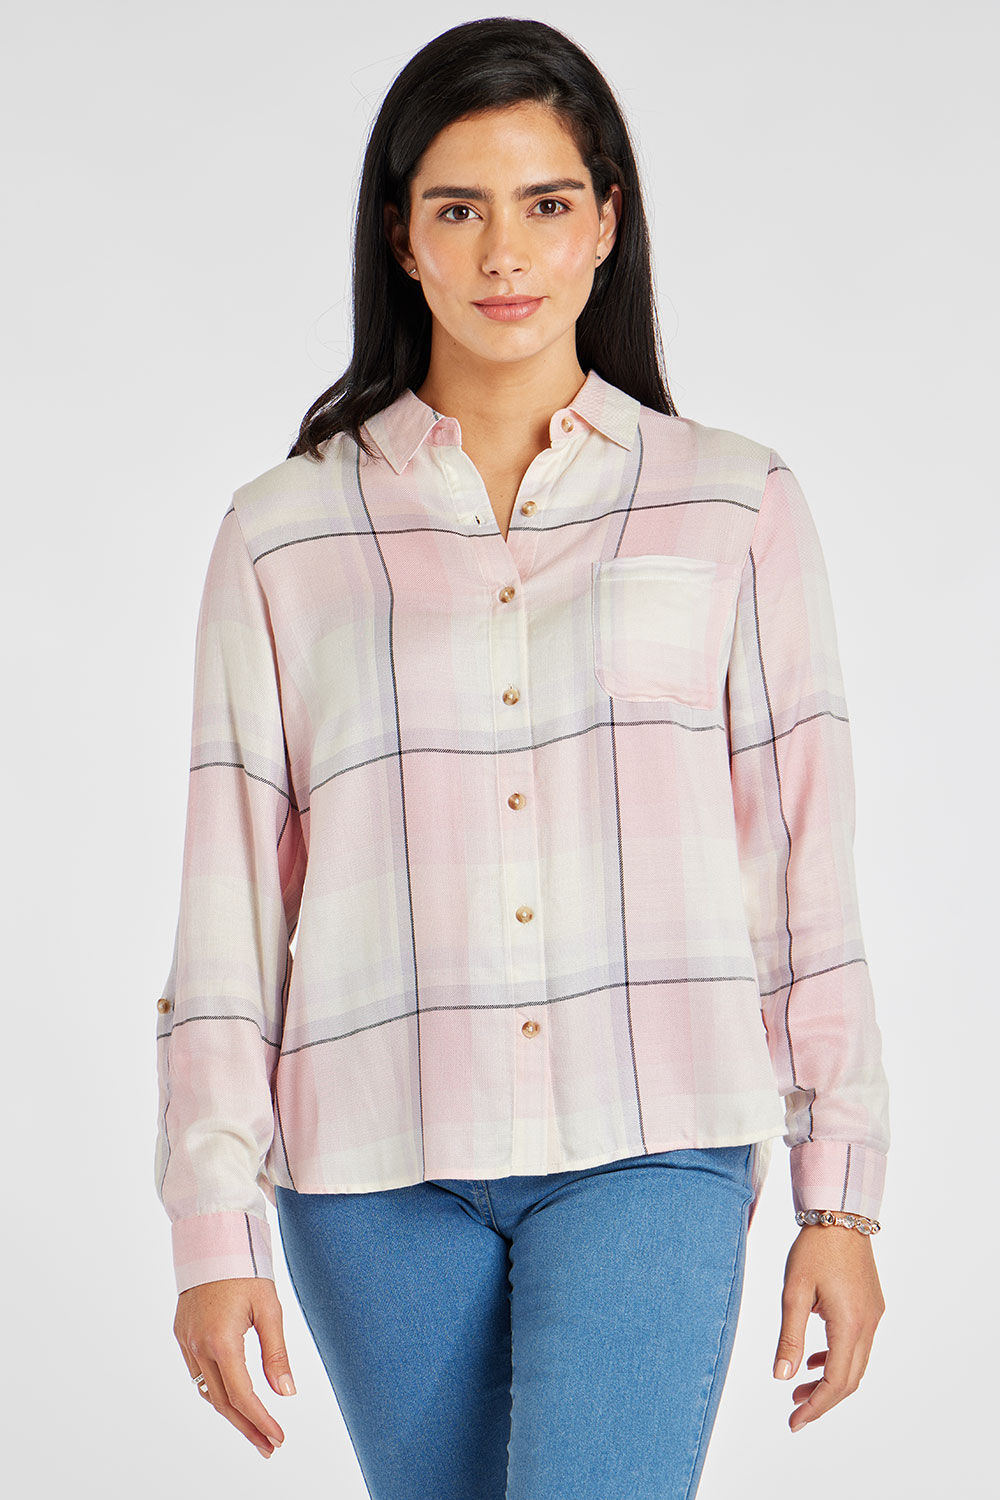 Bonmarche Pink Long Sleeve Checked Shirt, Size: 26